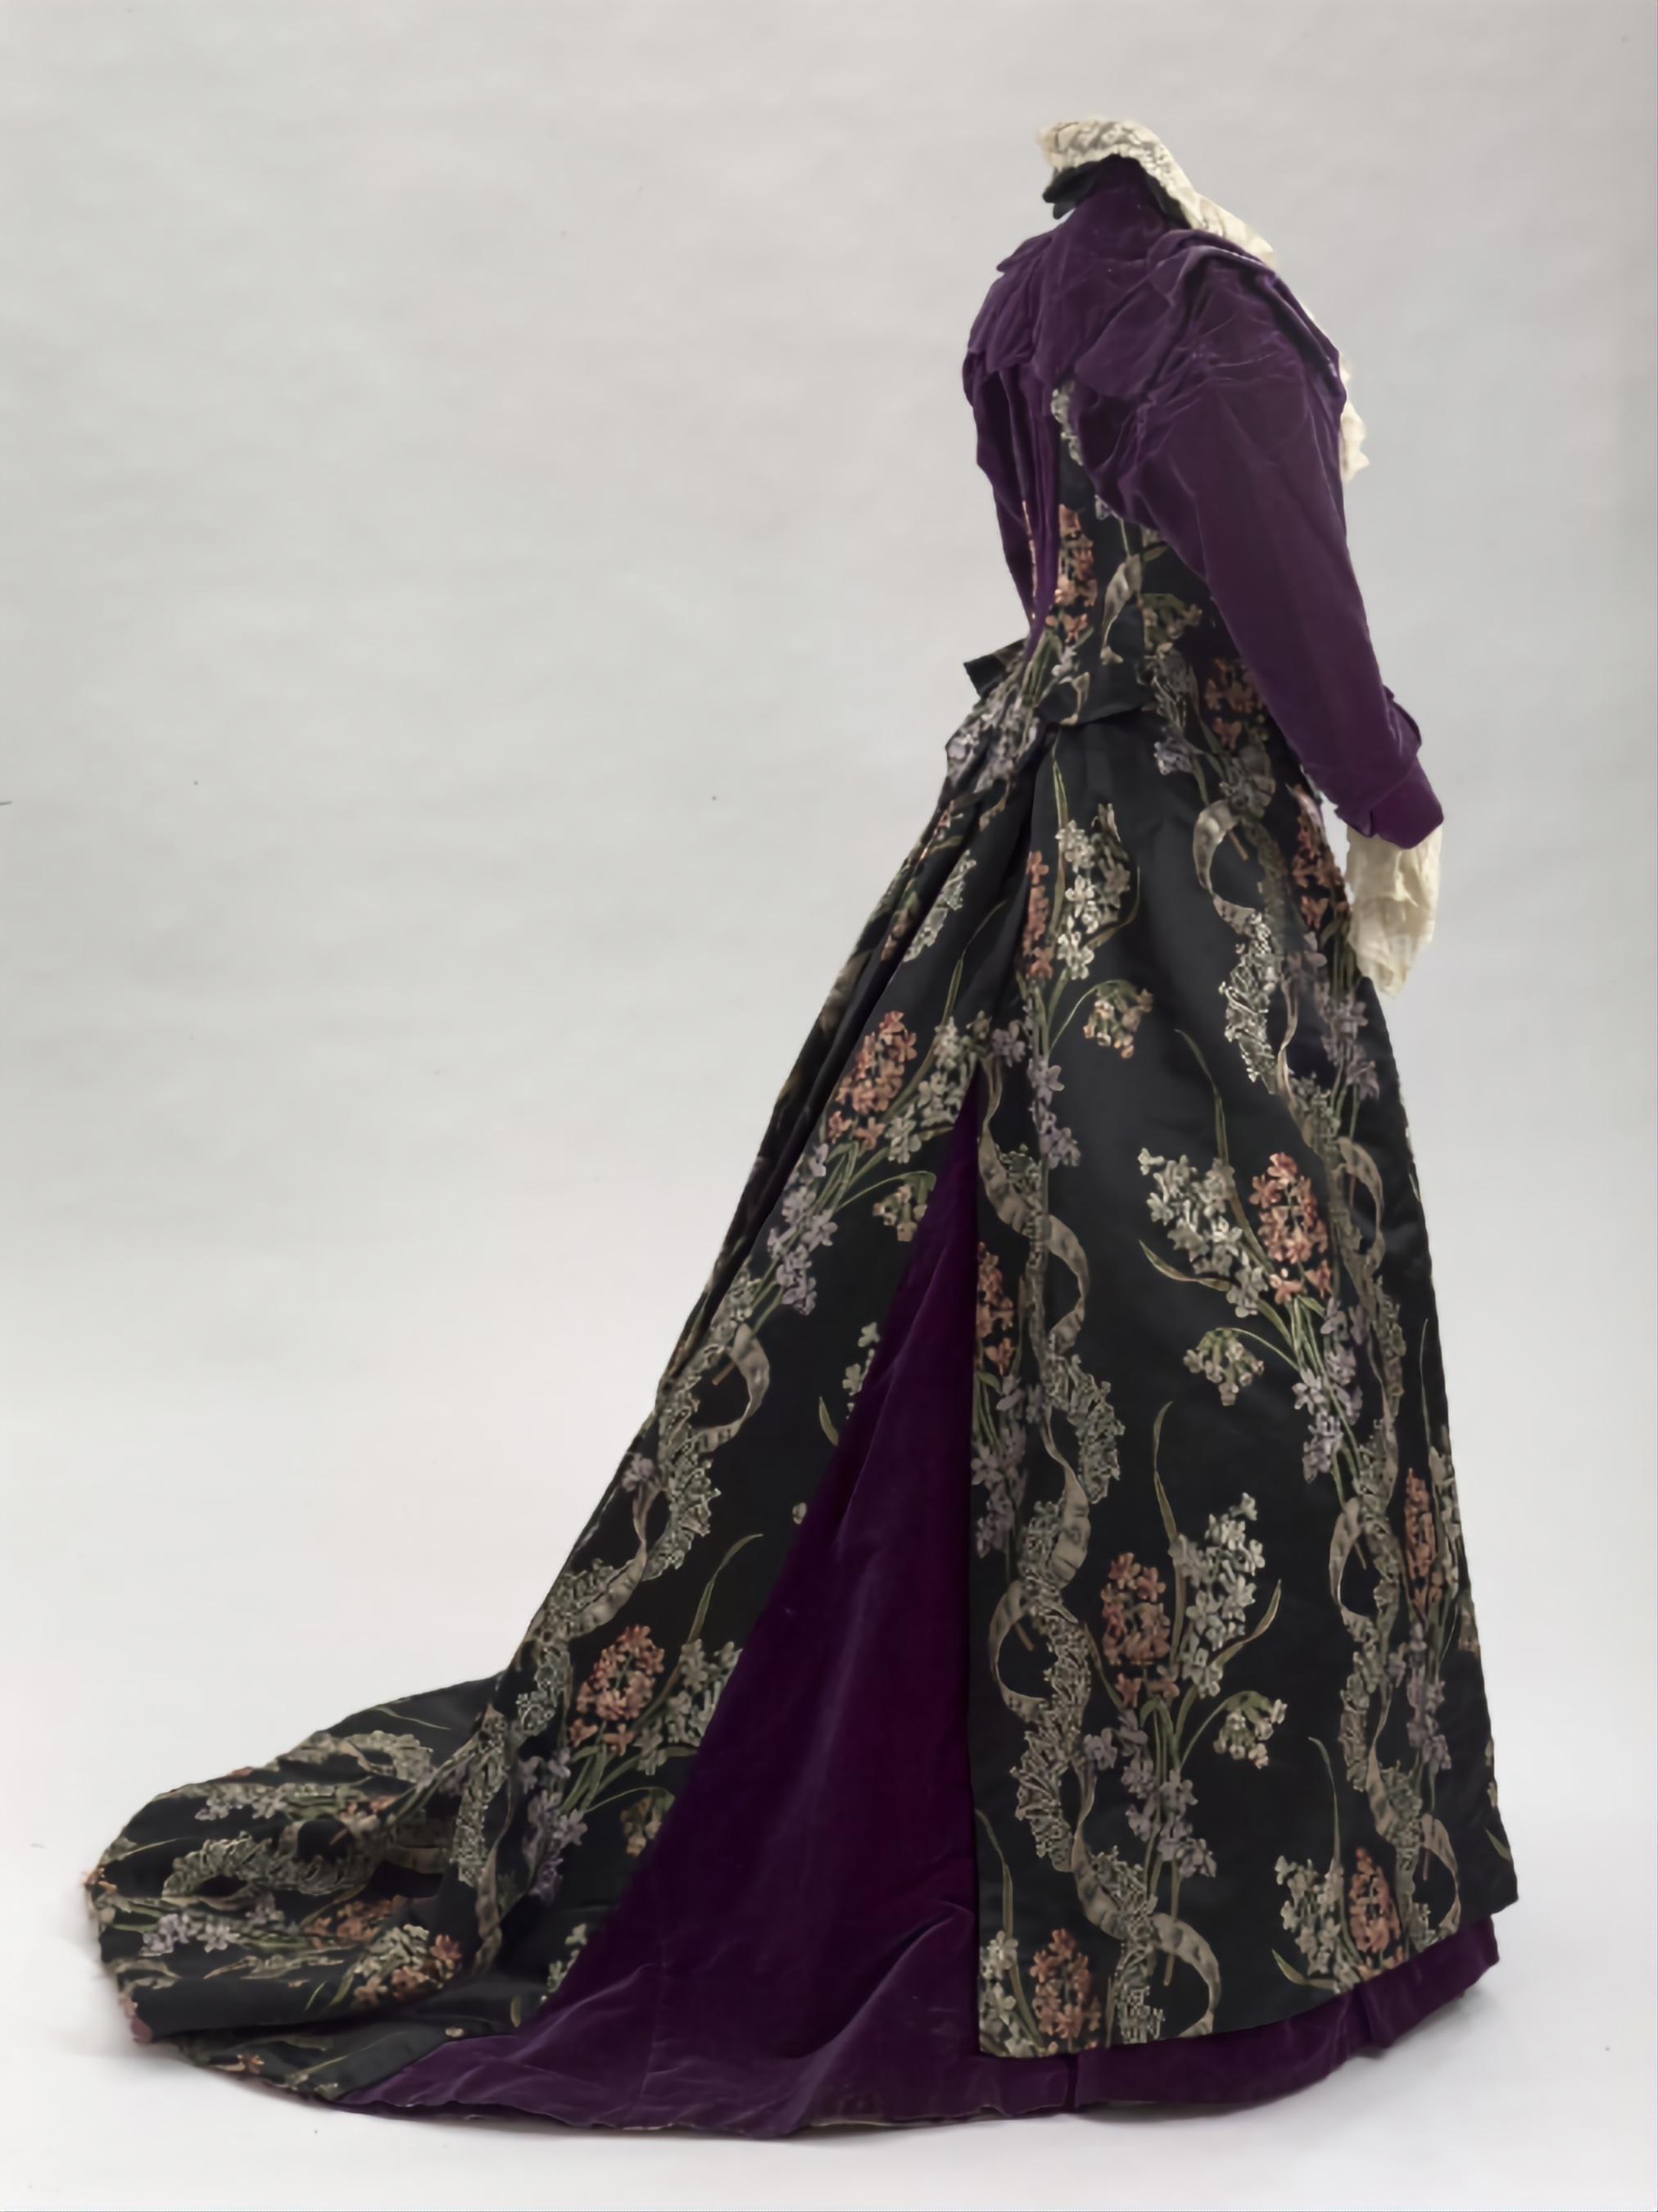 Visiting Dress of Empress Maria Feodorovna with Imitation of Lace and Satin Ribbons, Imperial Russia, ca. 1893. Satin broche, velvet, silk changeant, lace.jpg